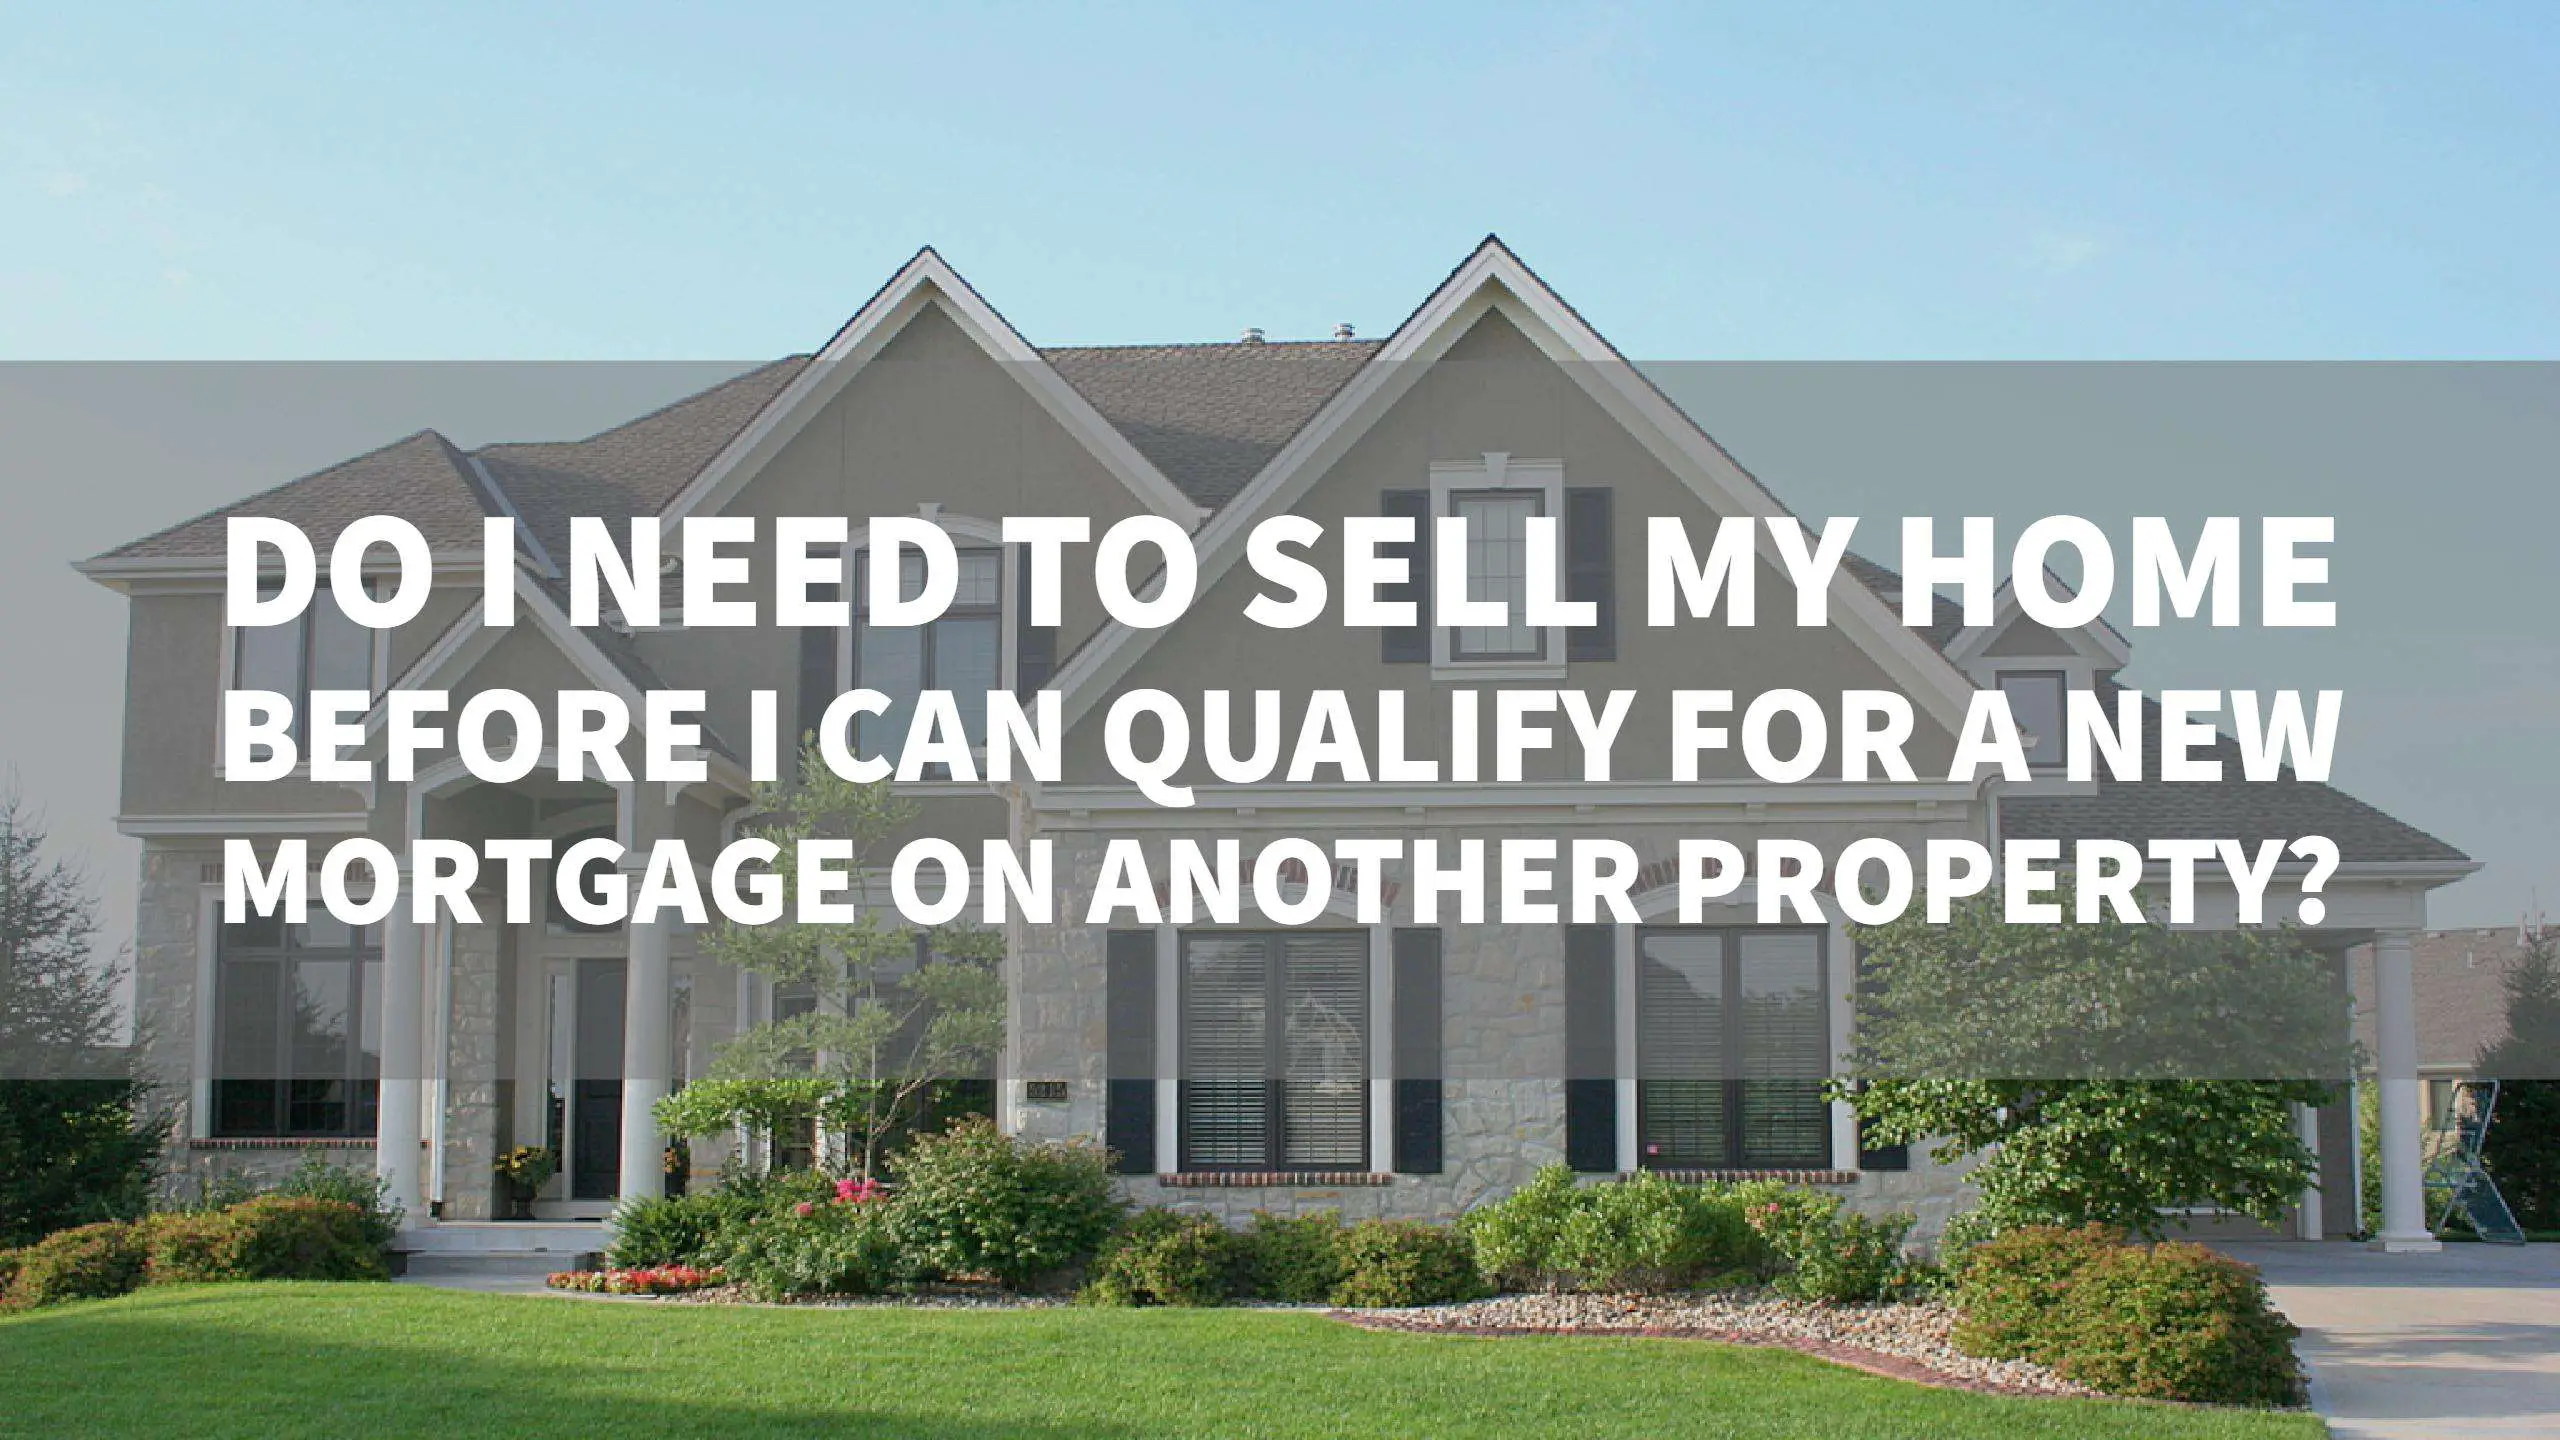 Do I Need To Sell My Home Before I Can Qualify For A New ...